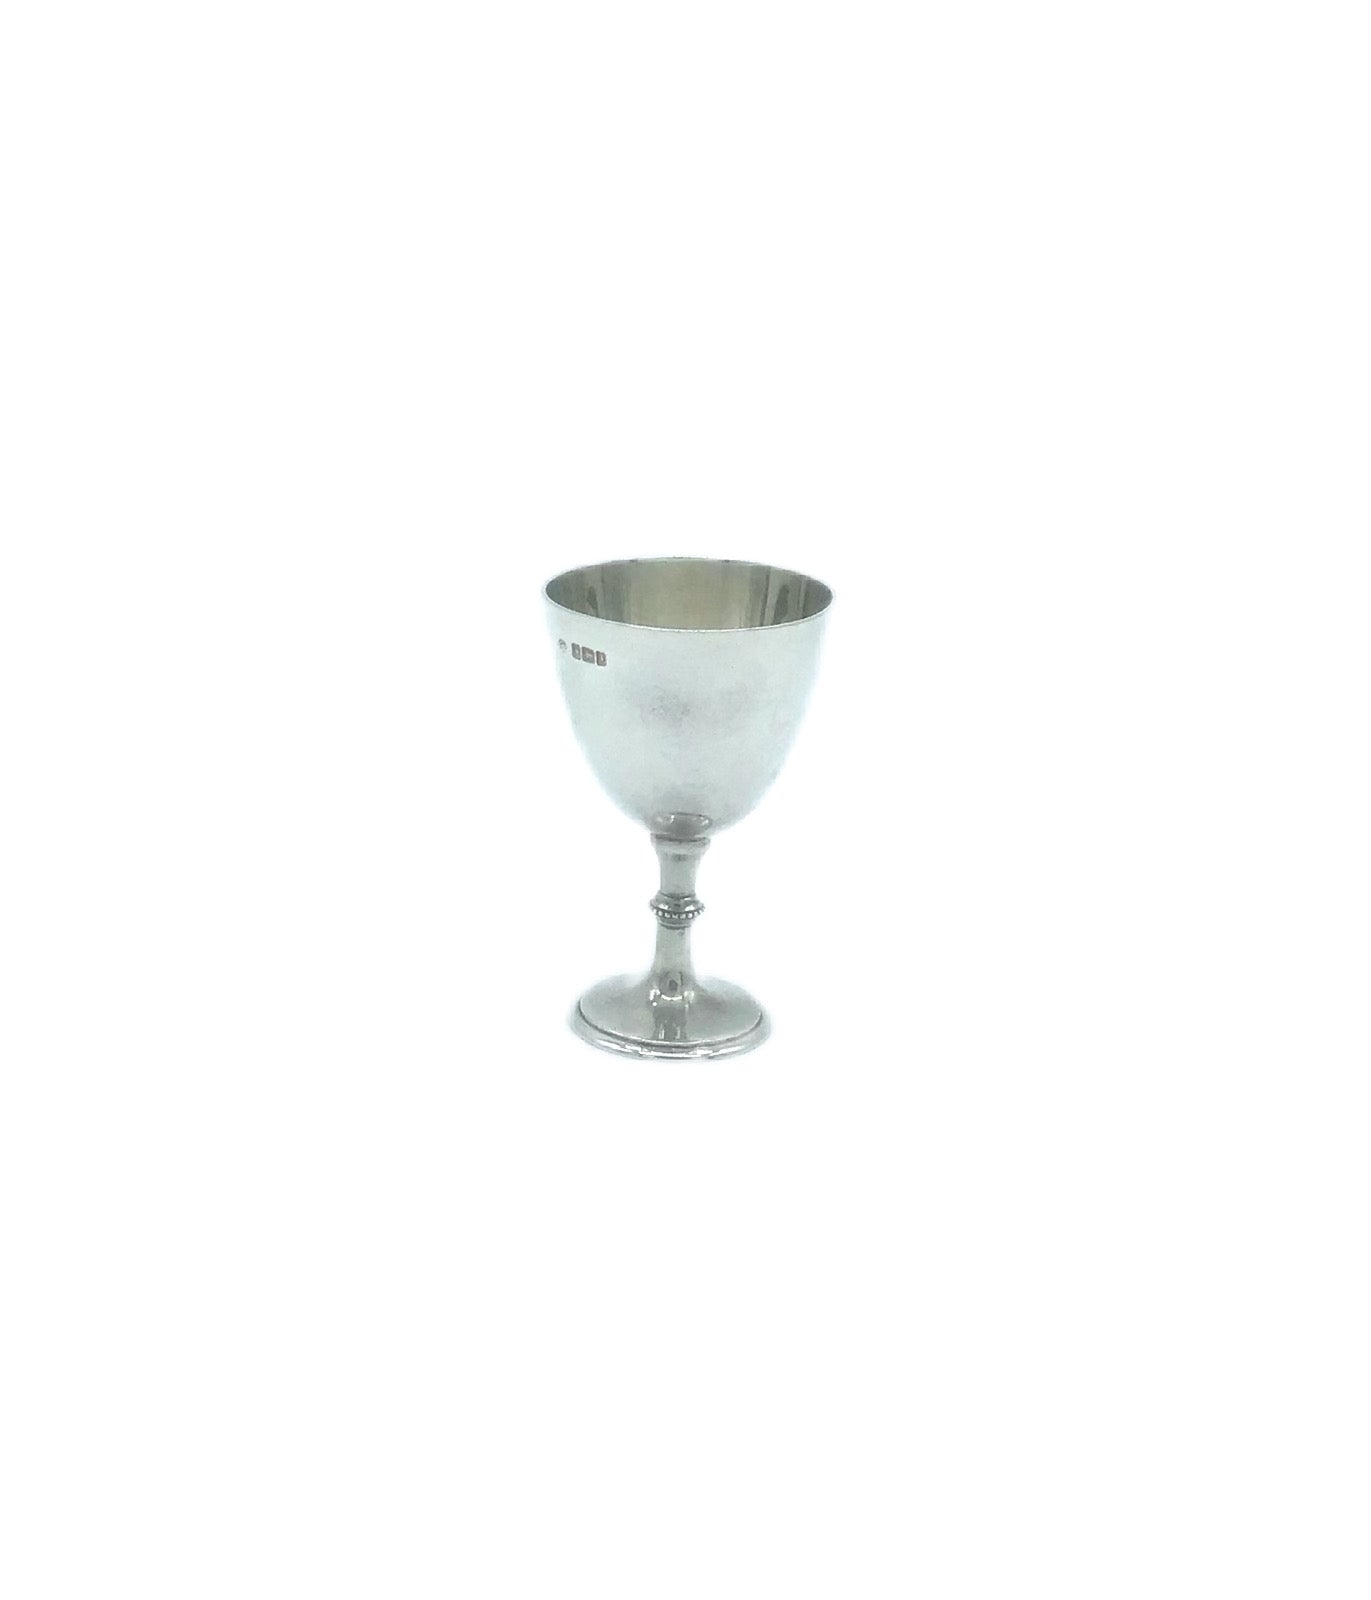 Antique English Sterling Silver Egg Cup or Server, George V - 43 Chesapeake Court Antiques